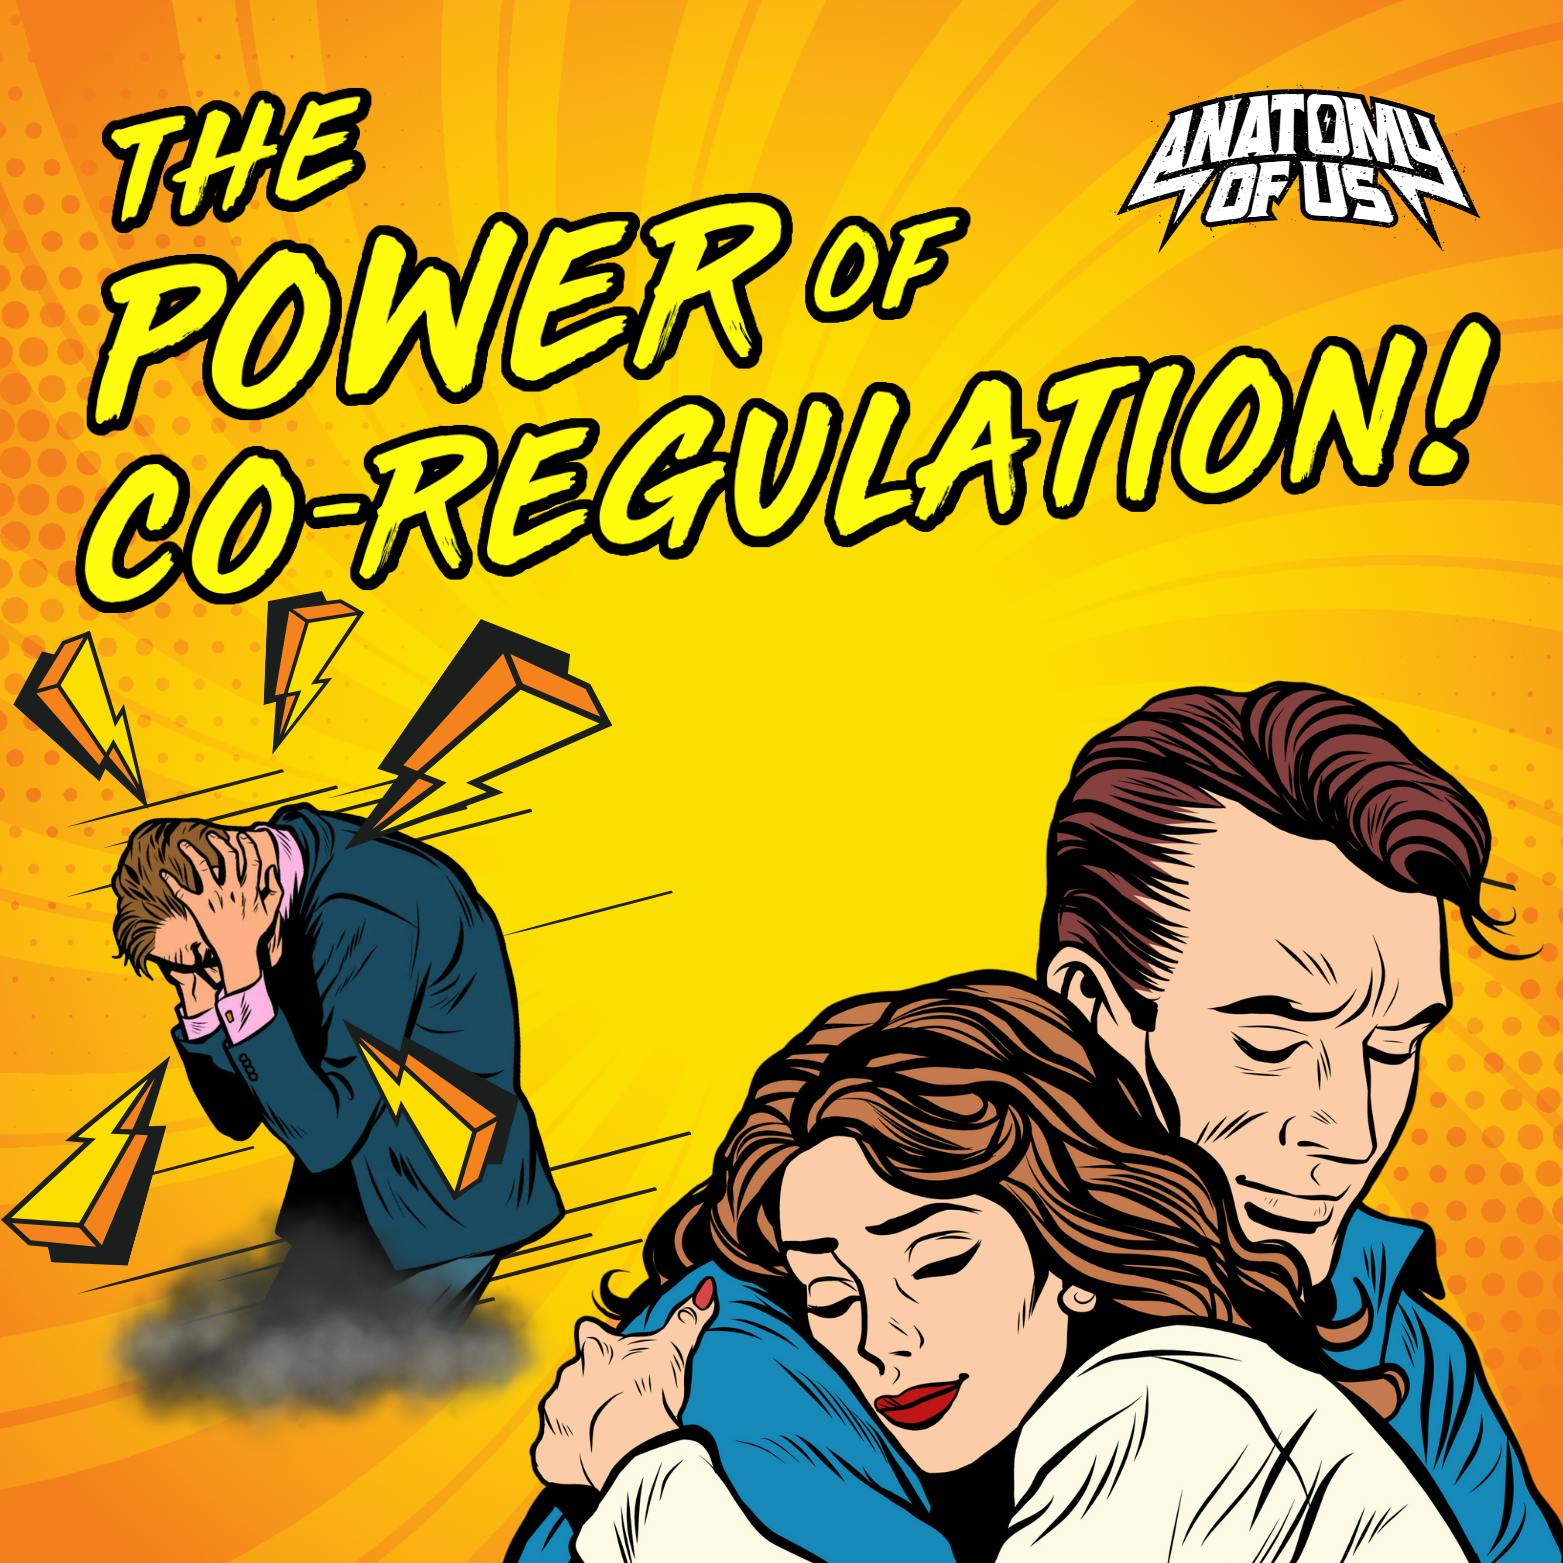 The Power of Co-Regulation